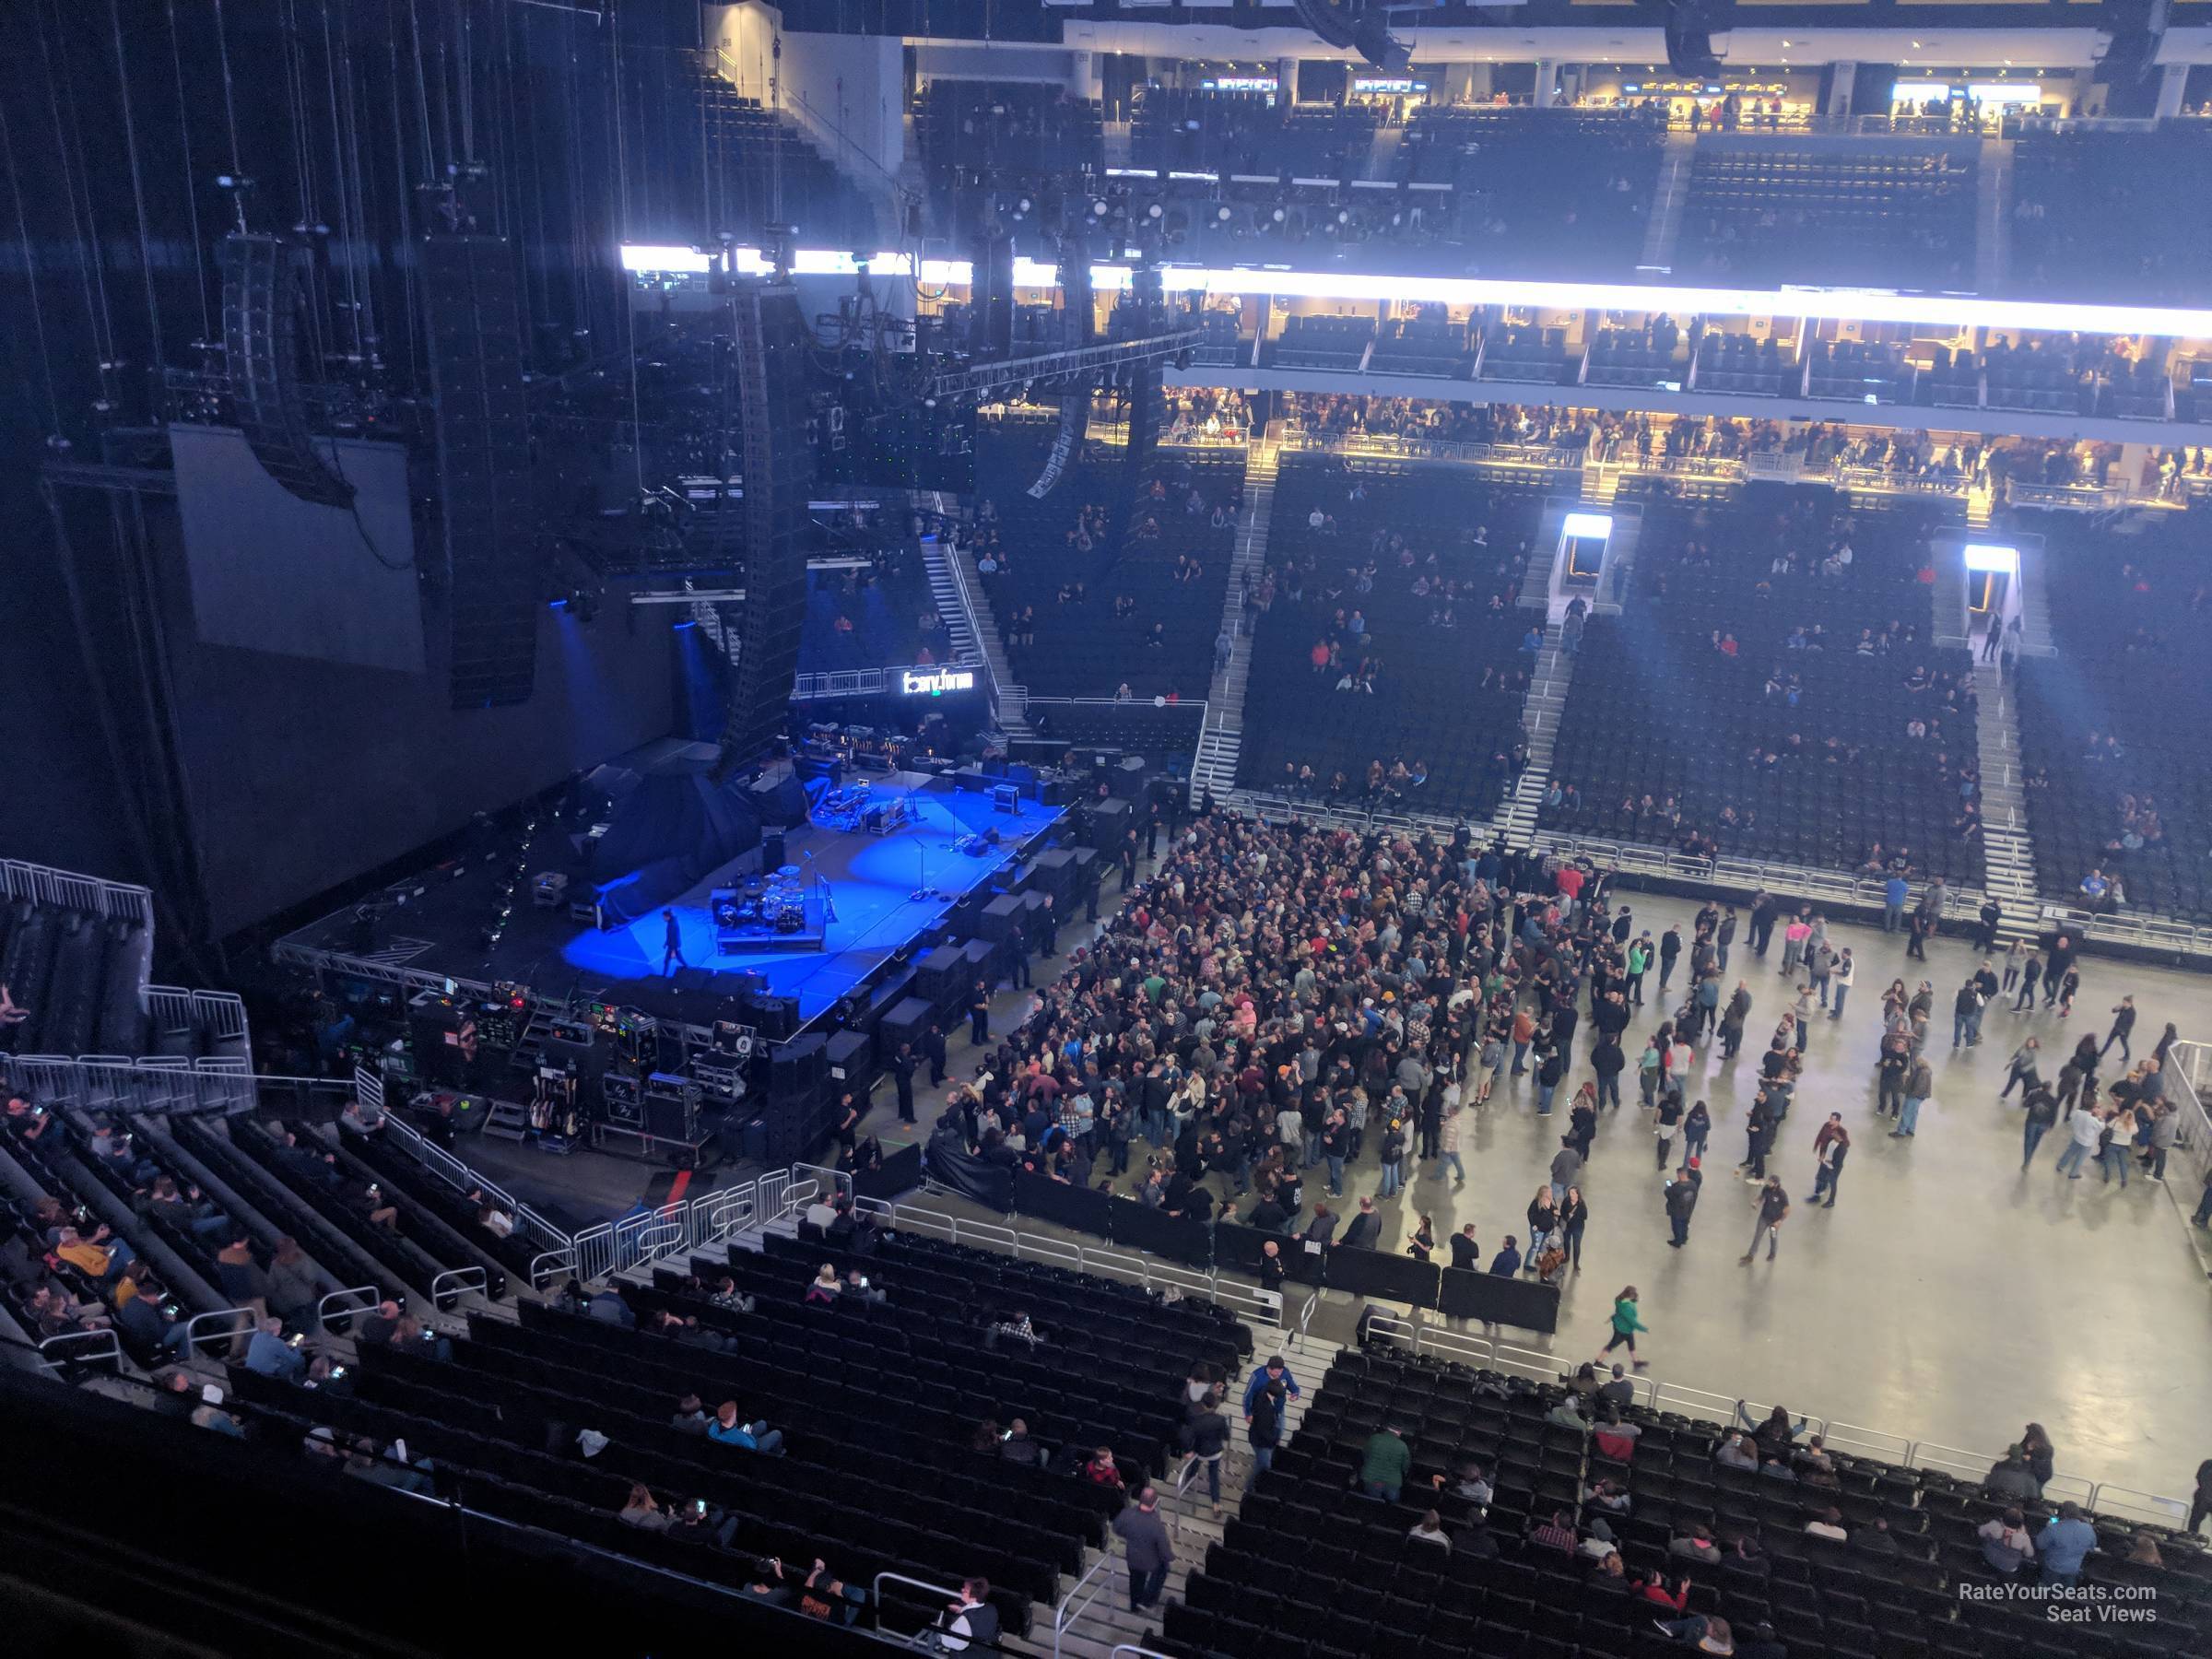 section 208, row 3 seat view  for concert - fiserv forum